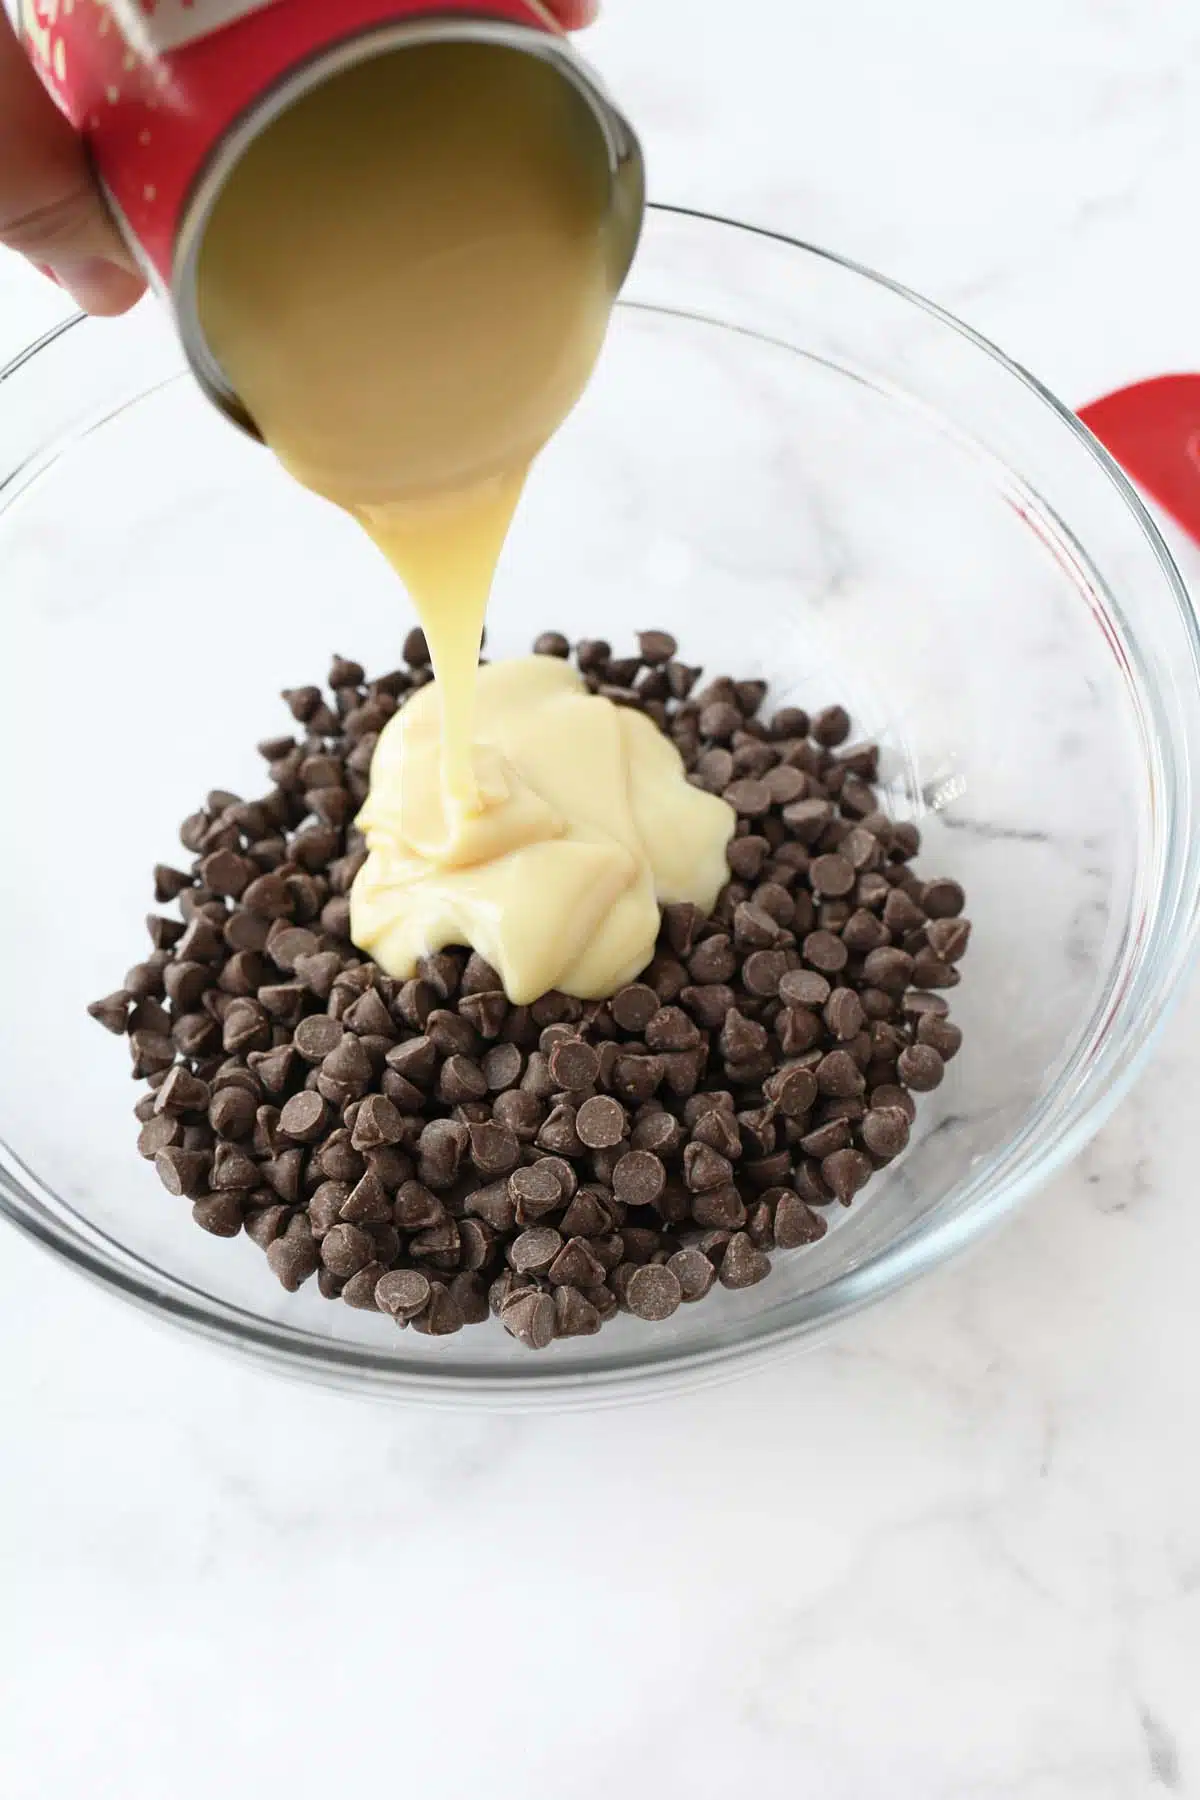 Sweetened condensed milk and chocolate chips in a glass bowl.